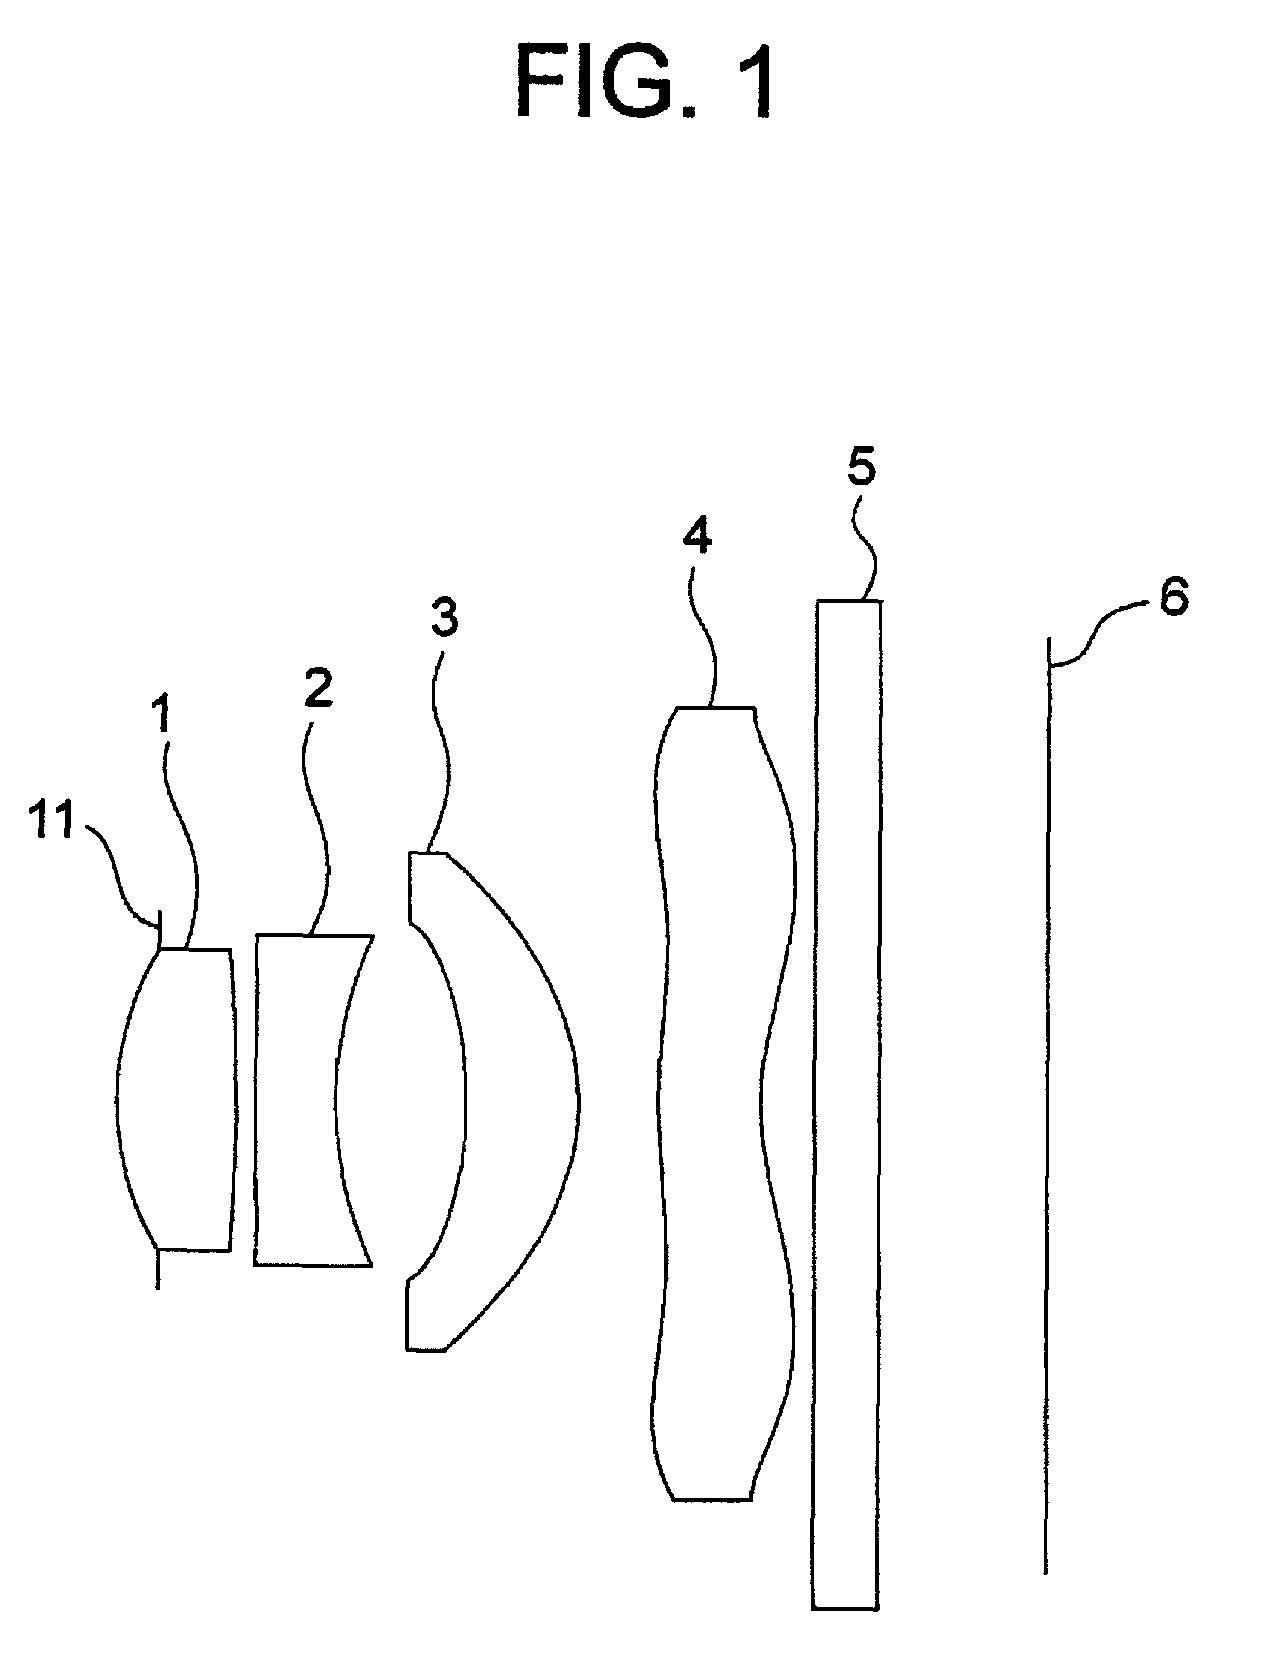 Image forming optical system